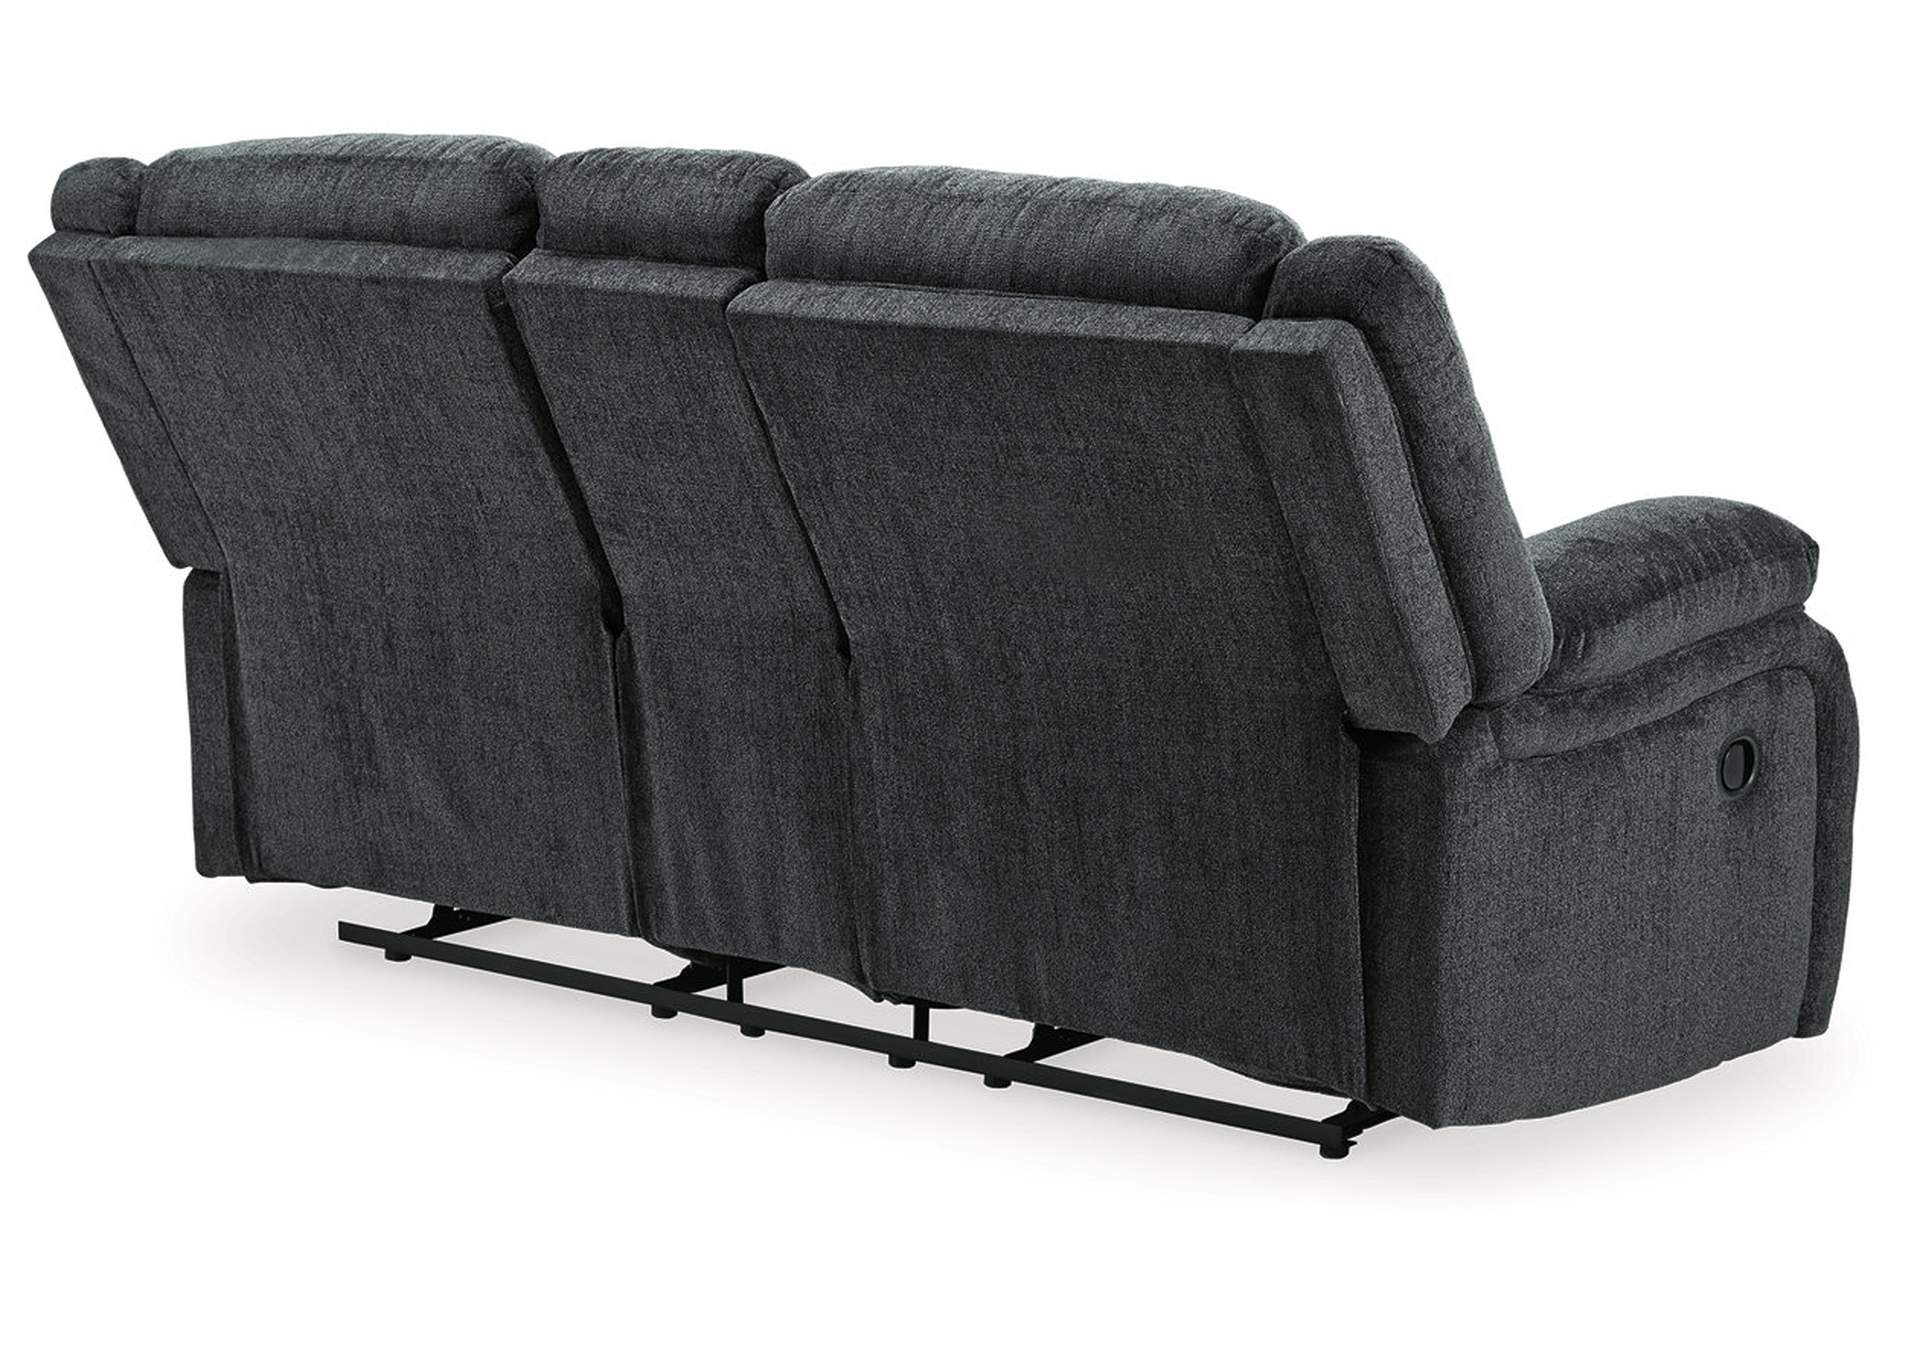 Draycoll Reclining Loveseat with Console,Signature Design By Ashley